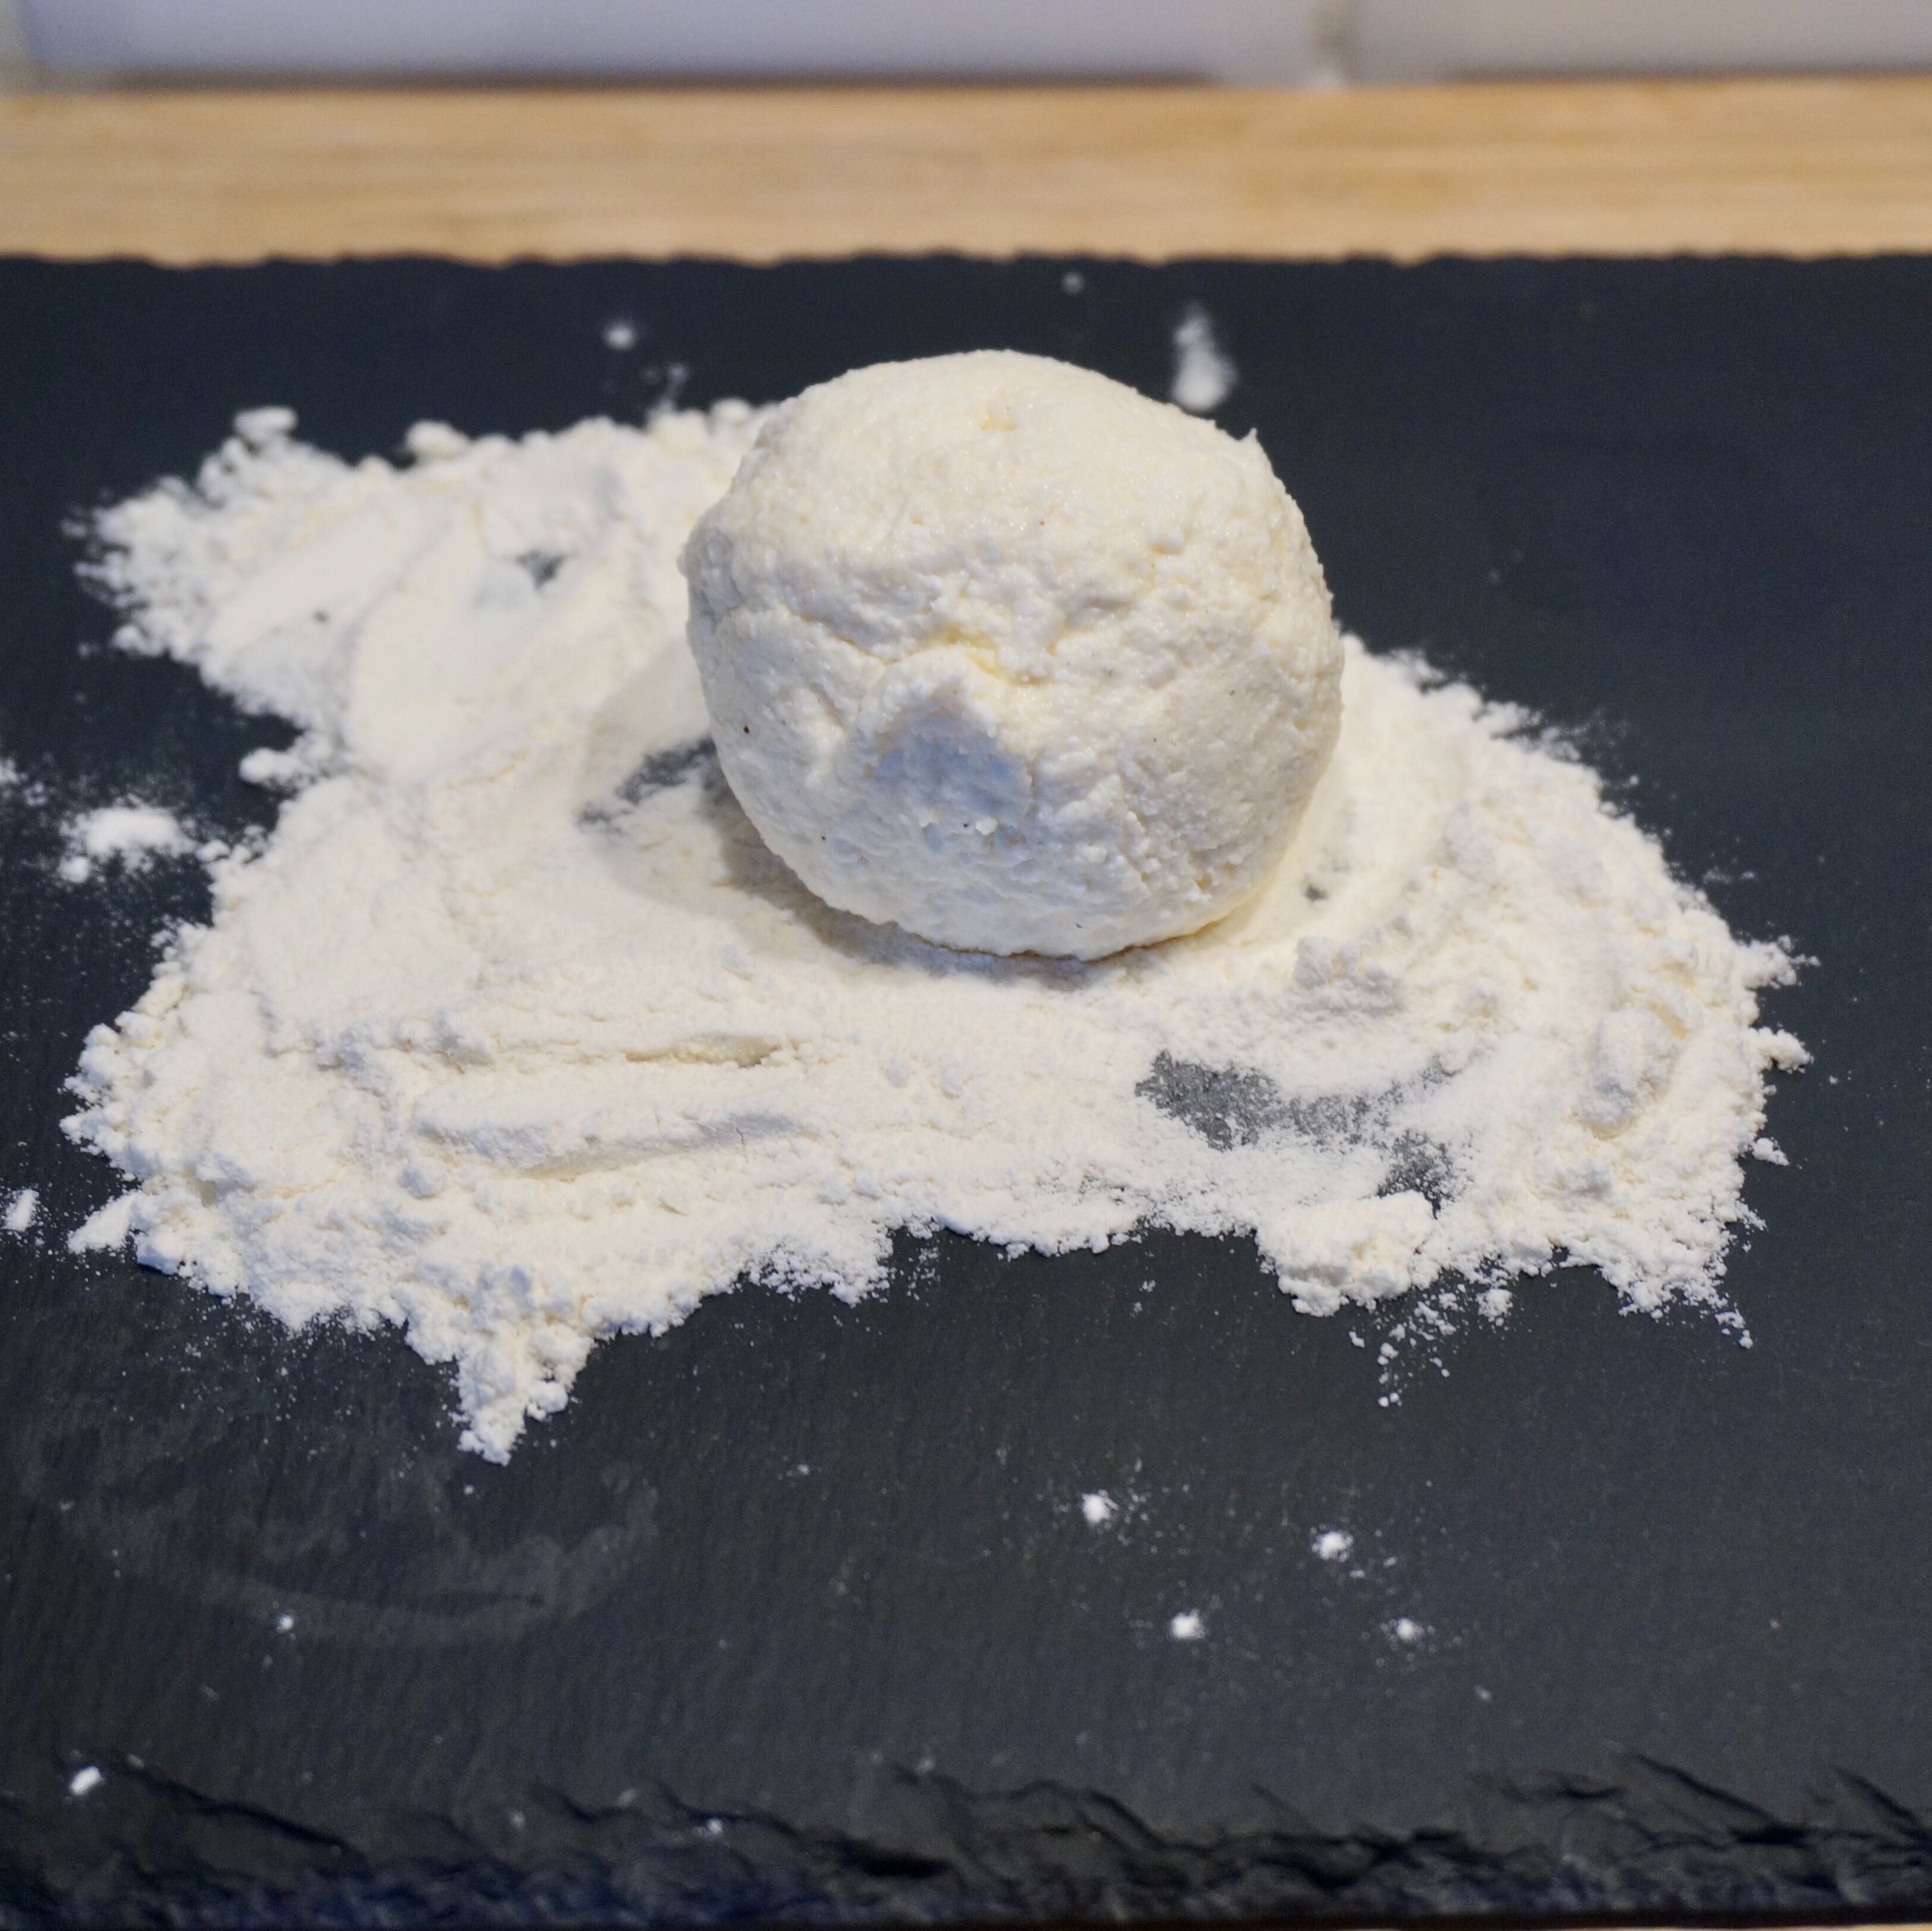 Pour the flour onto a separate plate, make balls from the mixture with your hands, roll in flour.